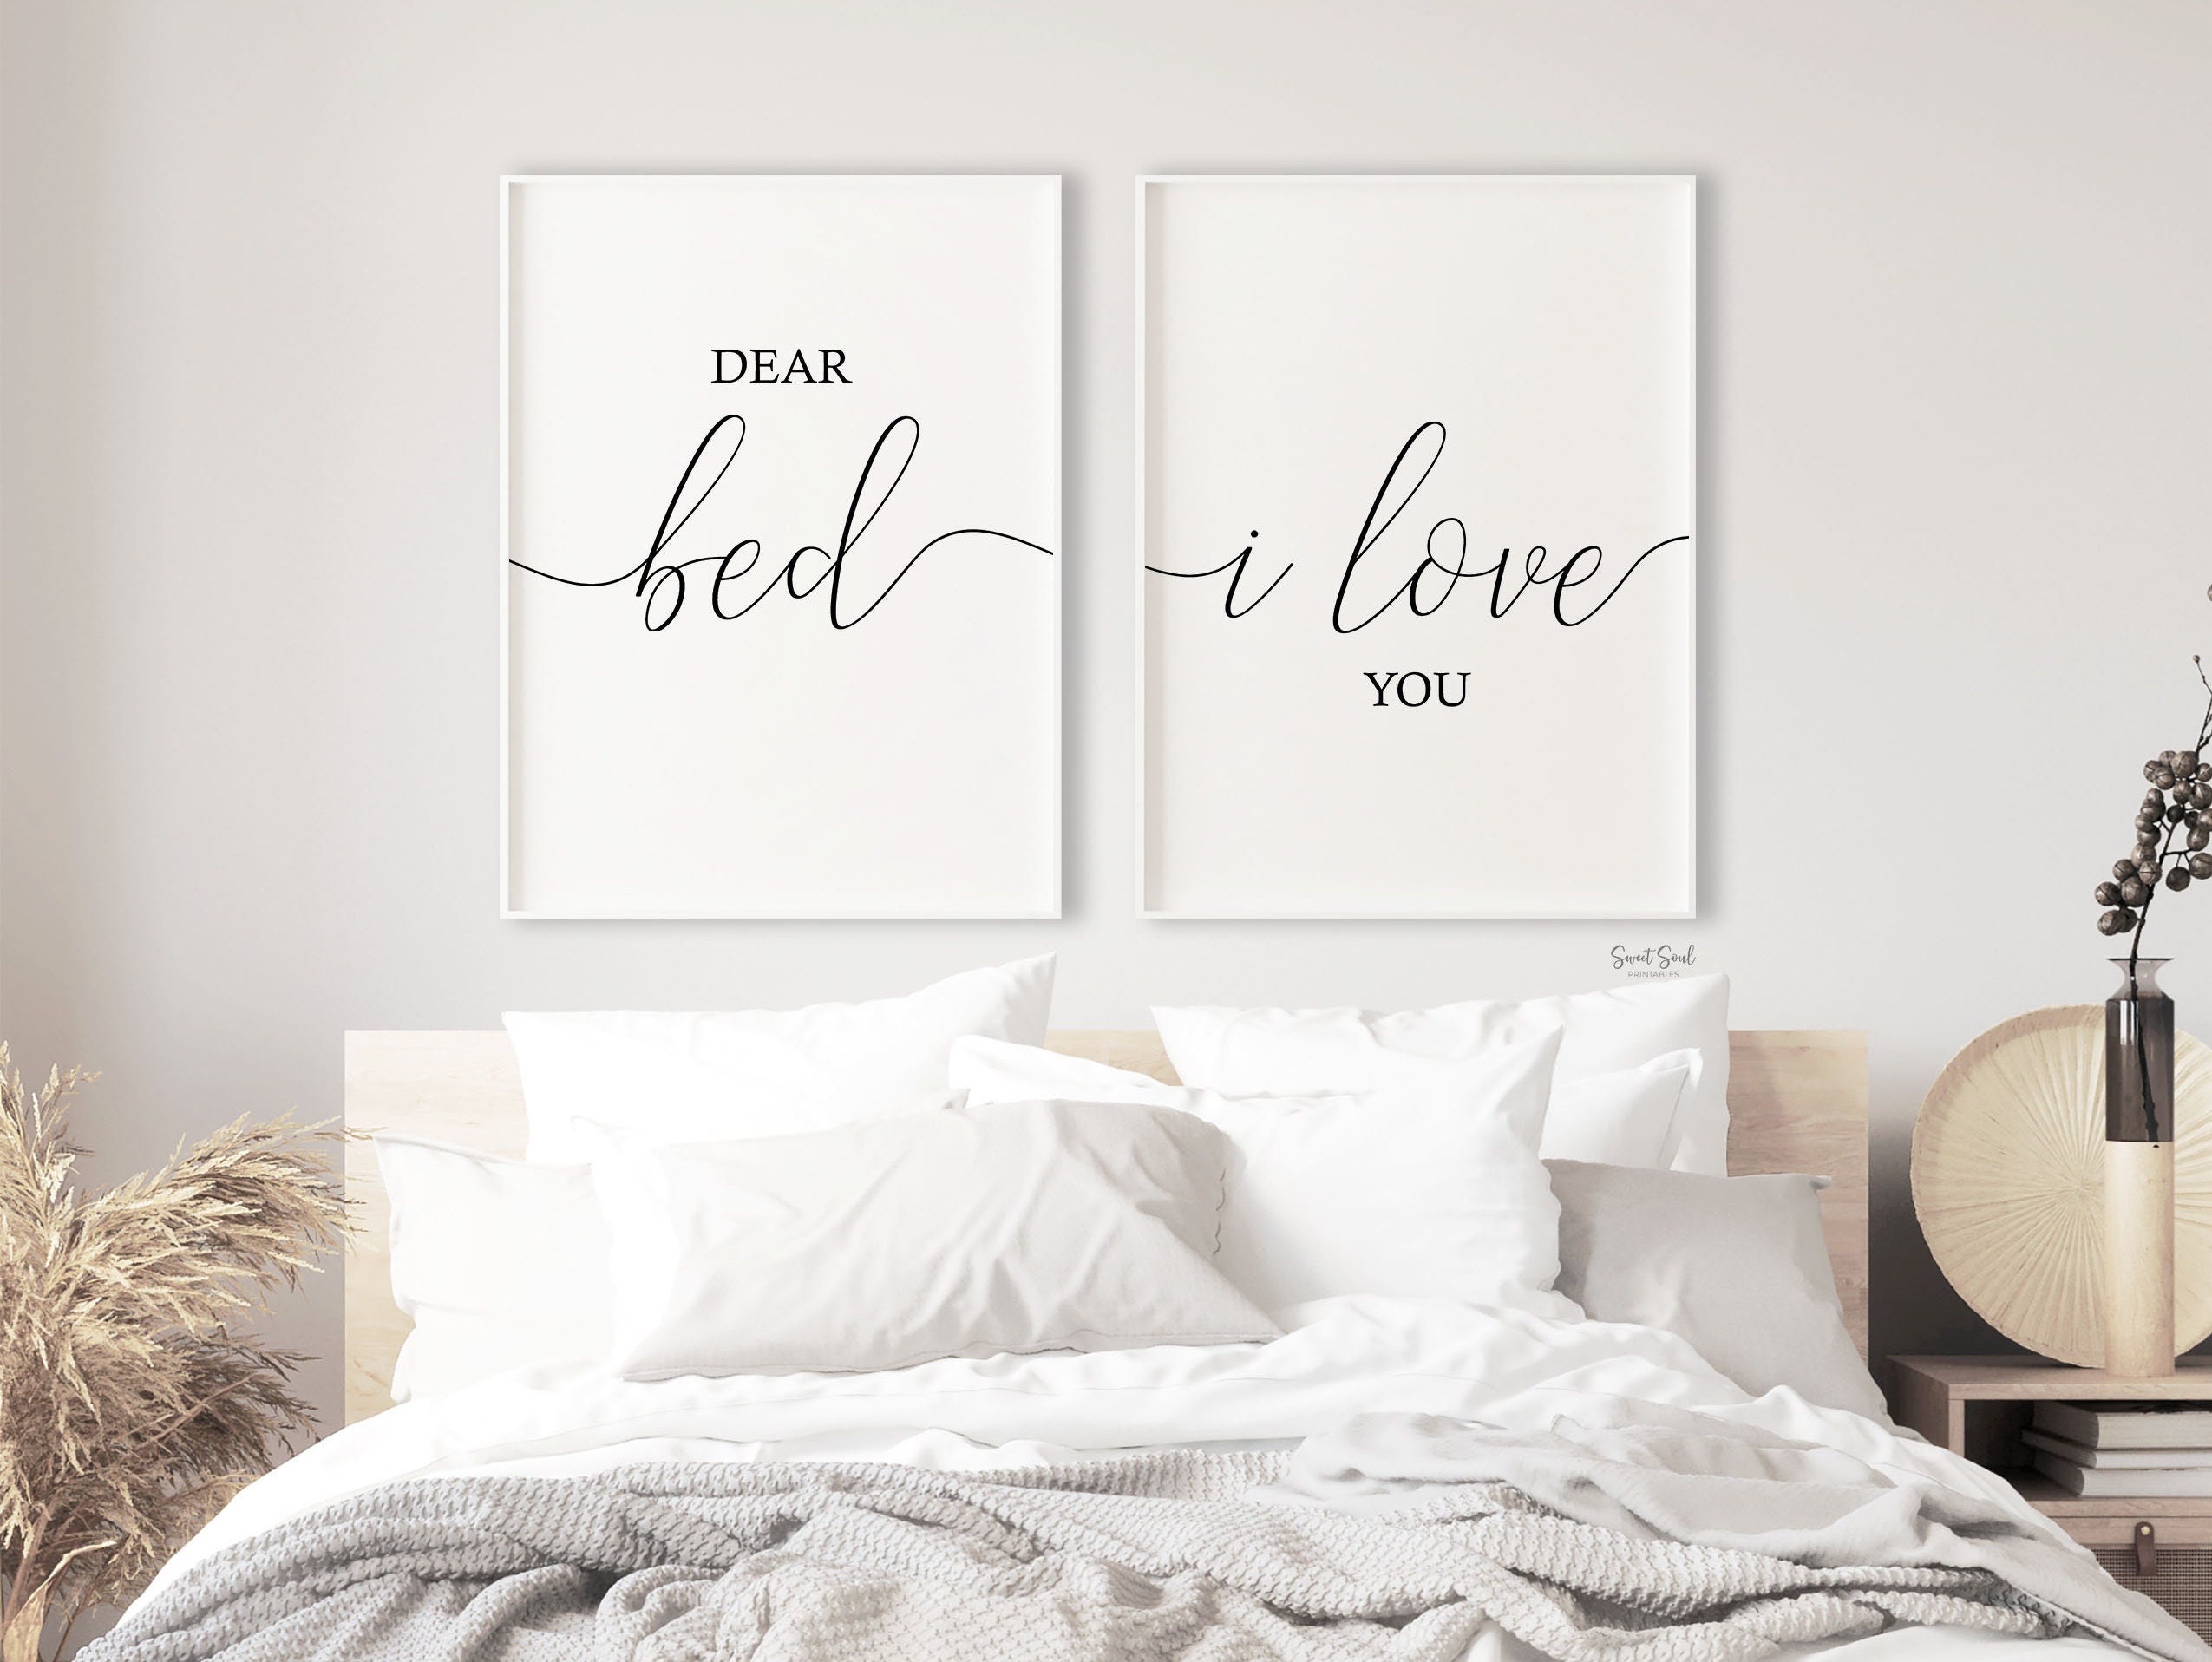 Dear Bed I Love You Bedroom Wall Decor Over the Bed Quotes - Etsy